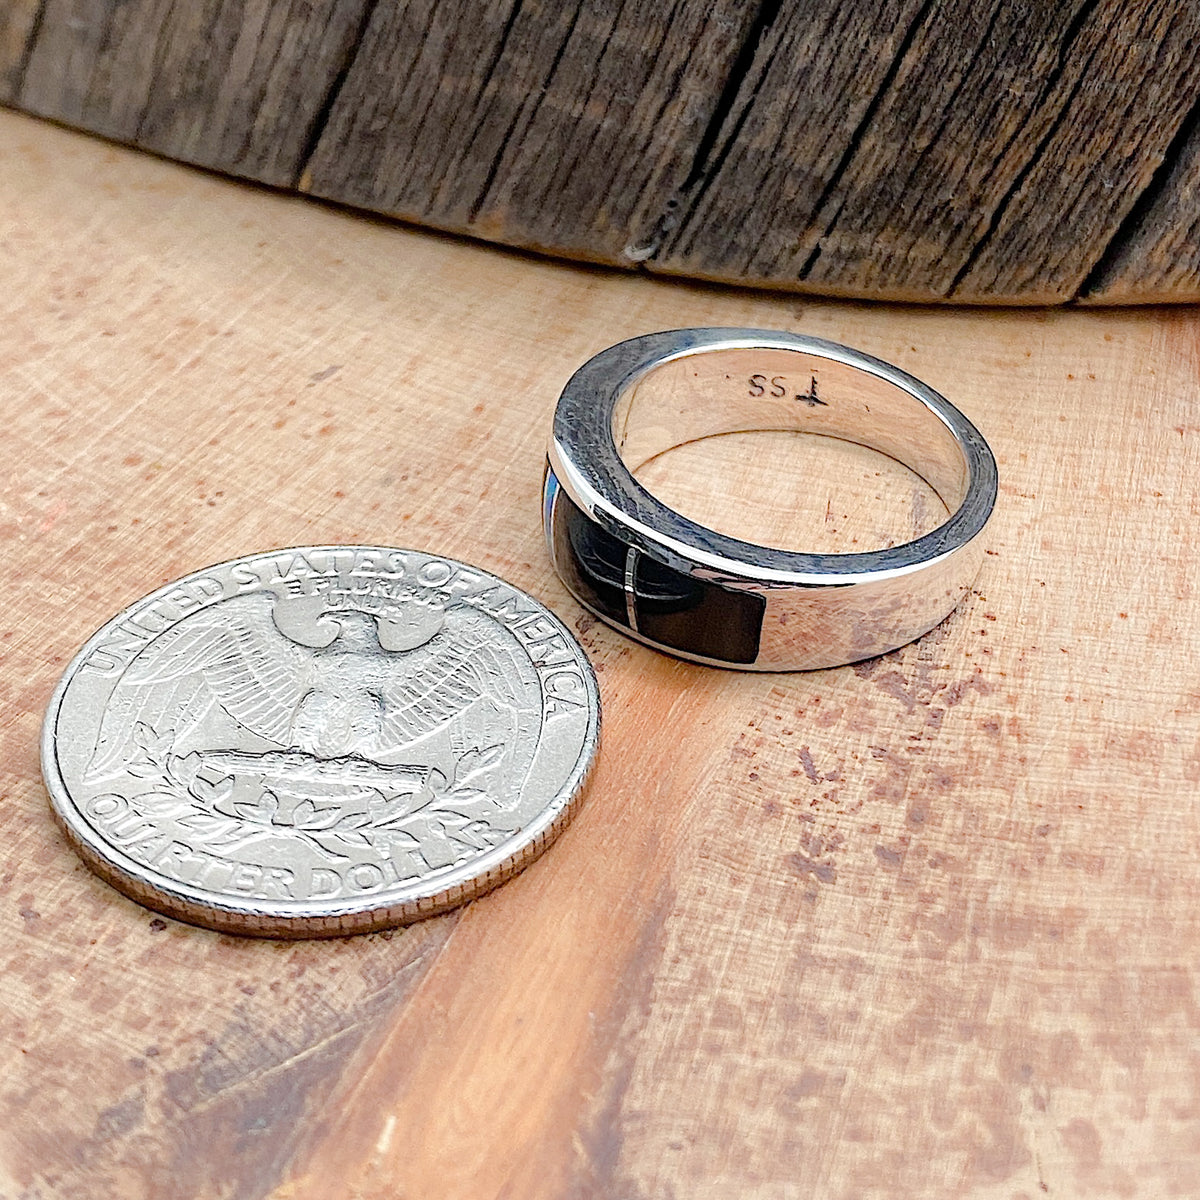 Comparison shot of a US quarter coin and Silver ring with several varieties of stones inlaid into the top. The silver ring is shown from the side.